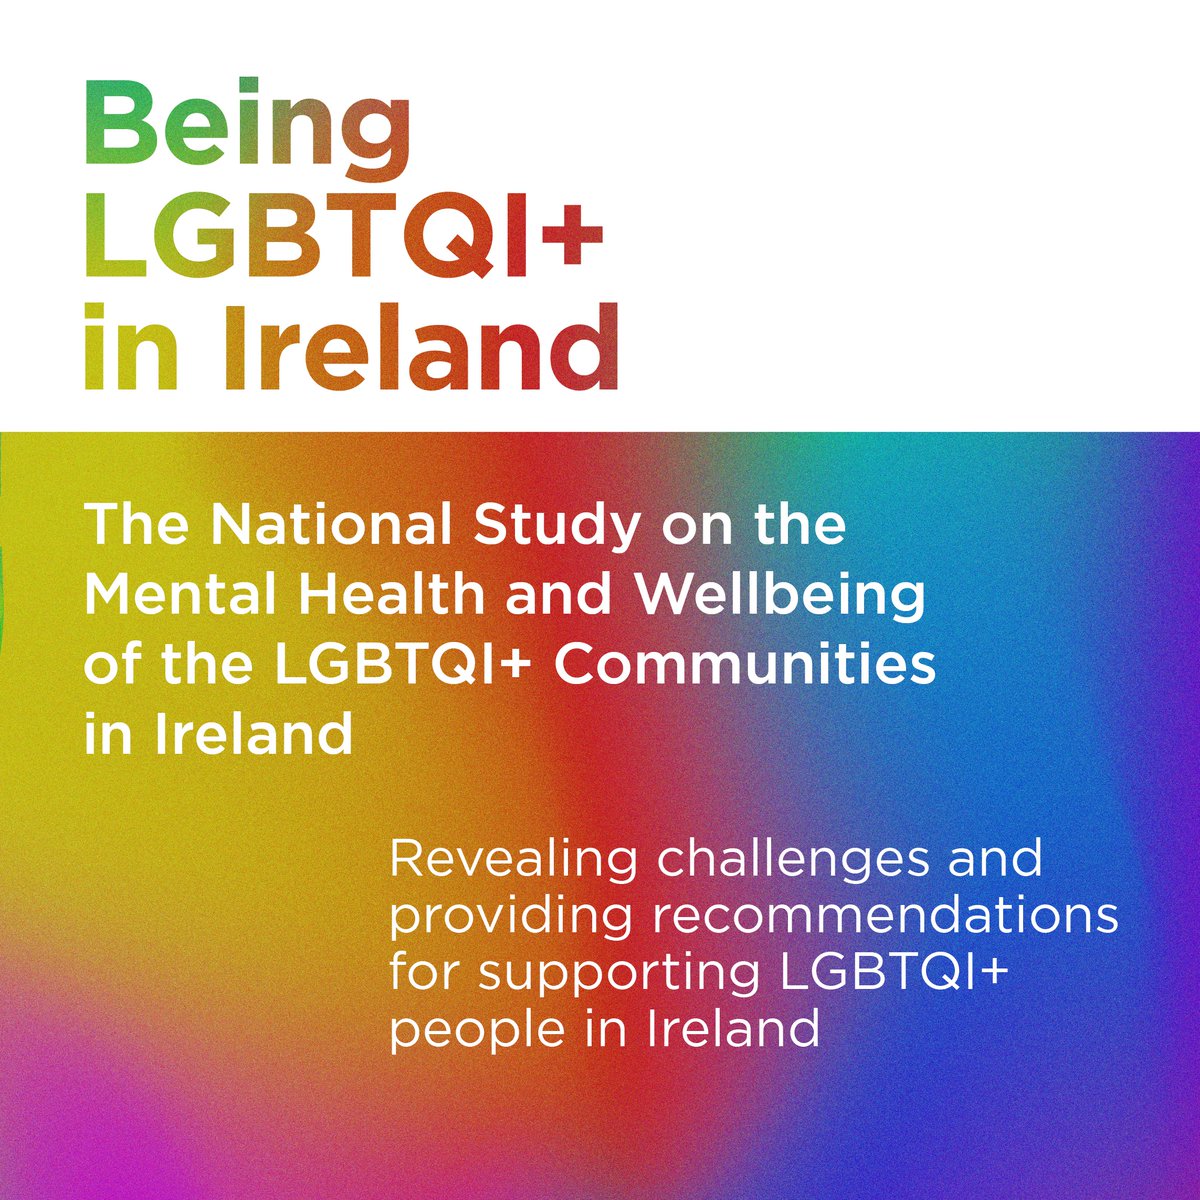 Today's report from @TCD_SNM and Belong To is the second iteration of the 2016 LGBTIreland Report and is the largest sample of LGBTQI+ participants with over 2,800 participants taking part in the study. Read more: tcd.ie/news_events/ar…